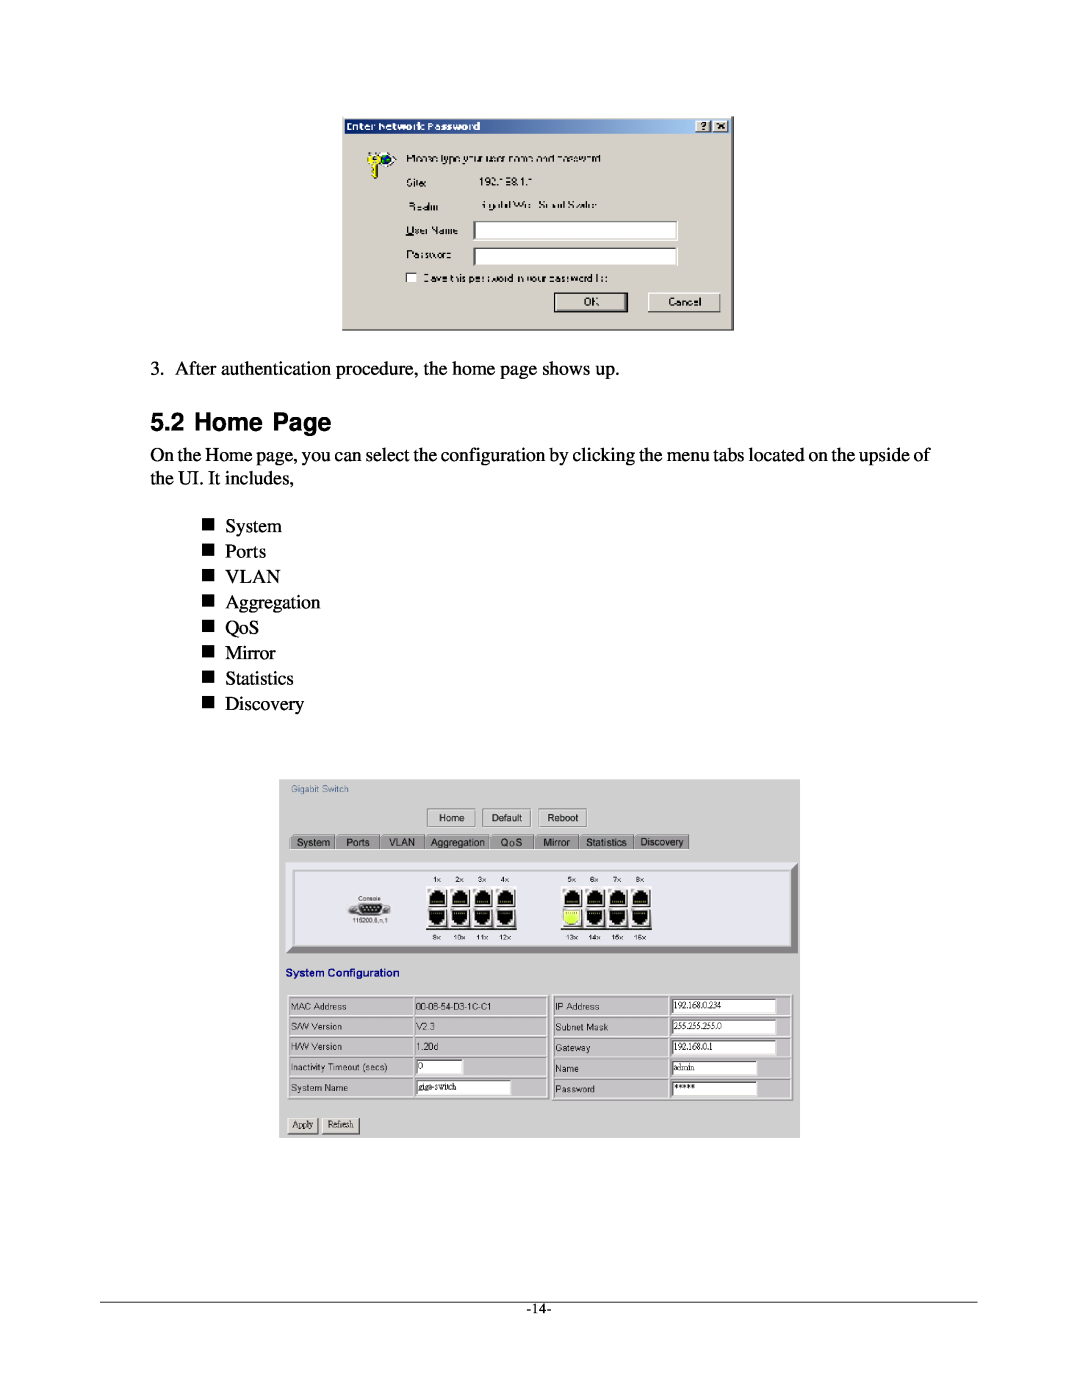 KTI Networks kgs-1601 manual Home Page, After authentication procedure, the home page shows up 